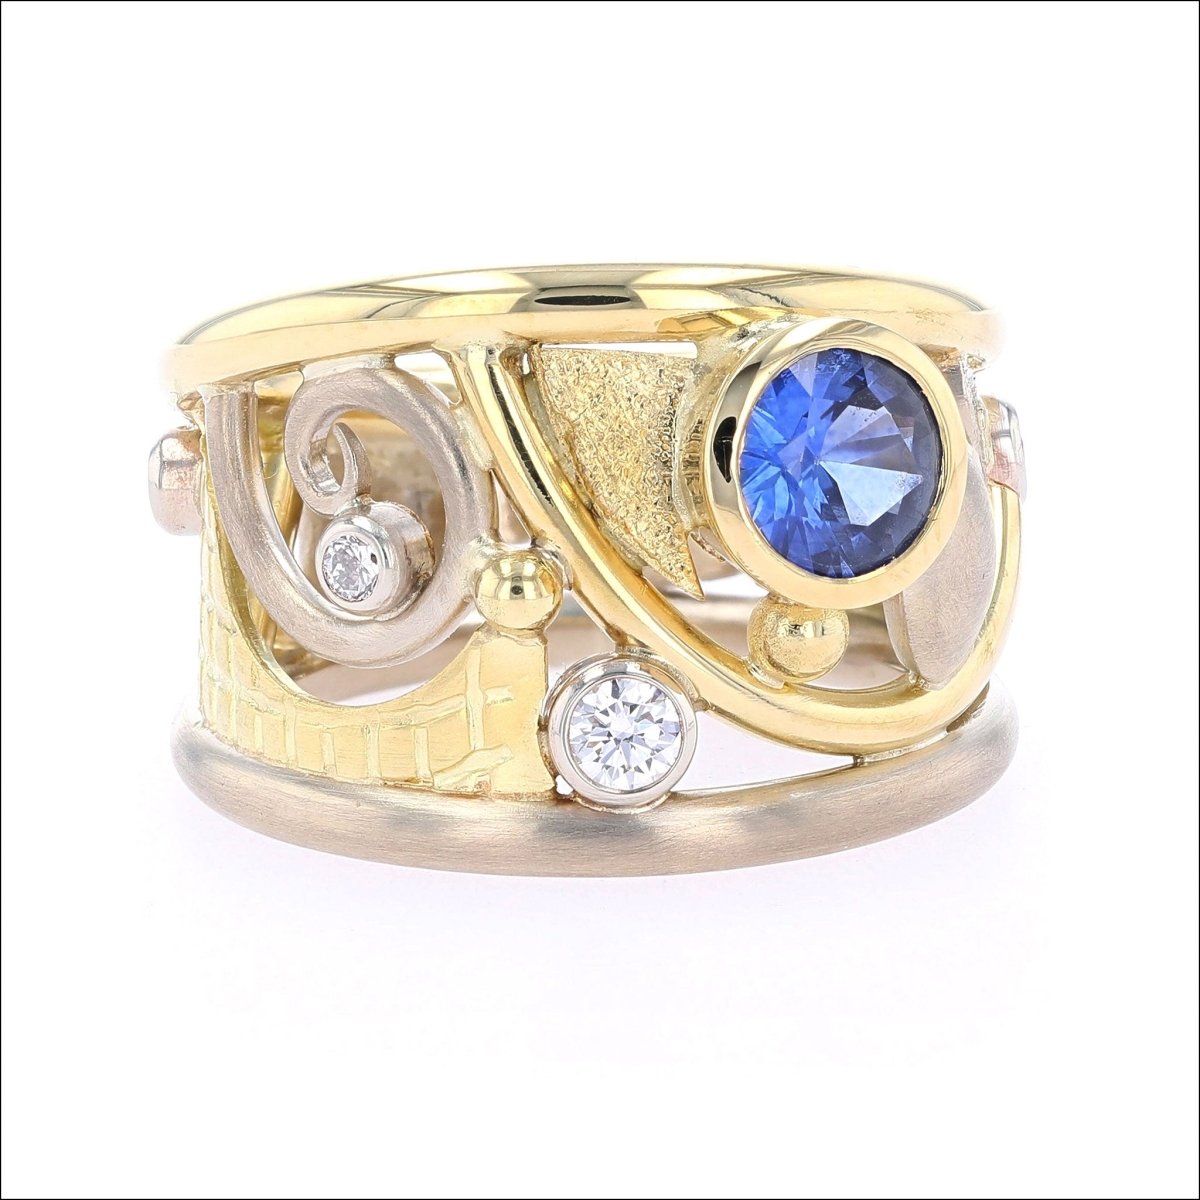 Sapphire Diamond "Parts" Ring 14KW 18KY - JewelsmithRings